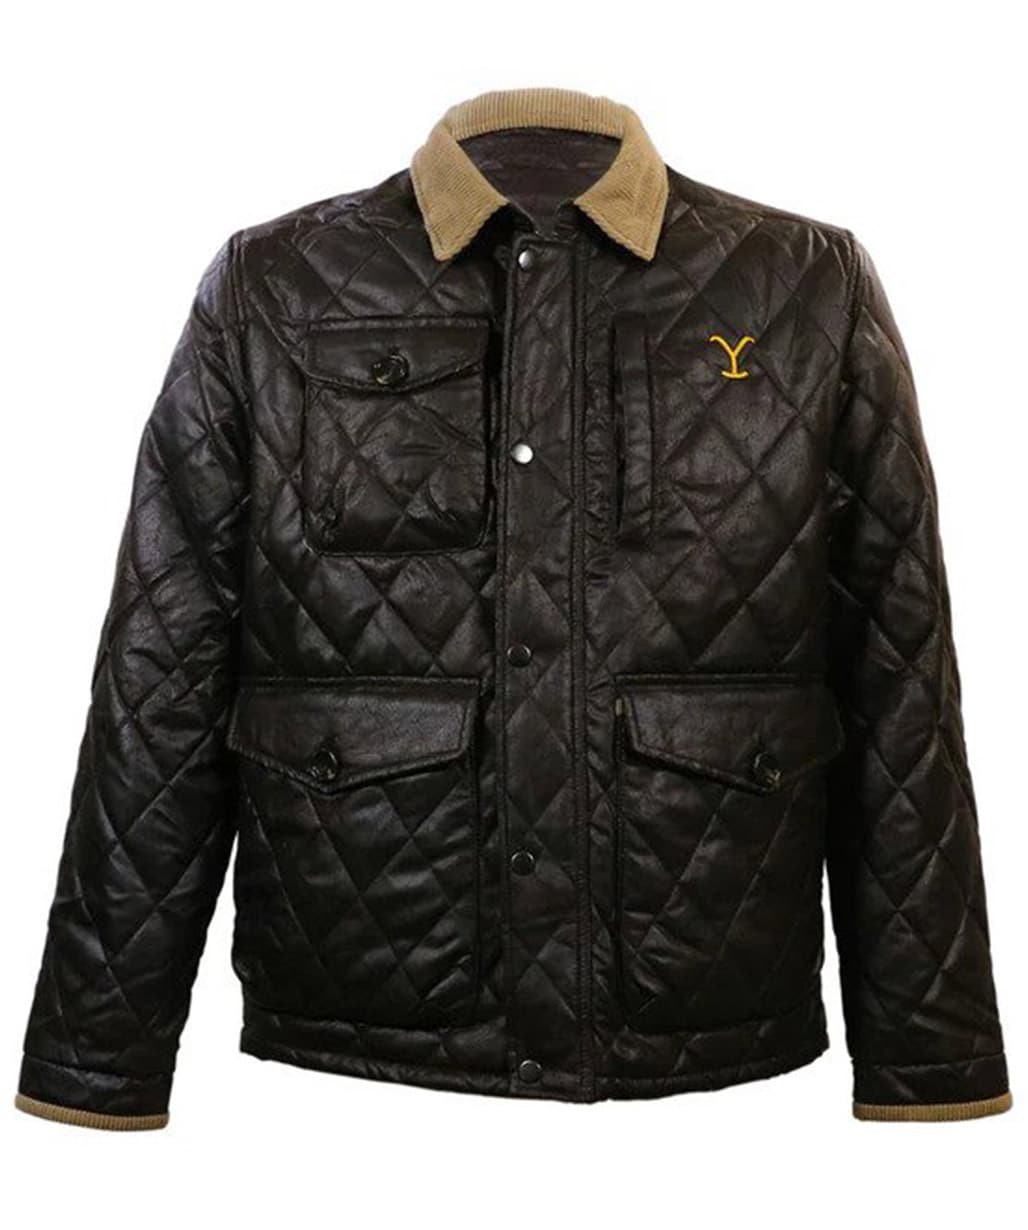 john-dutton-yellowstone-black-quilted-leather-jacket